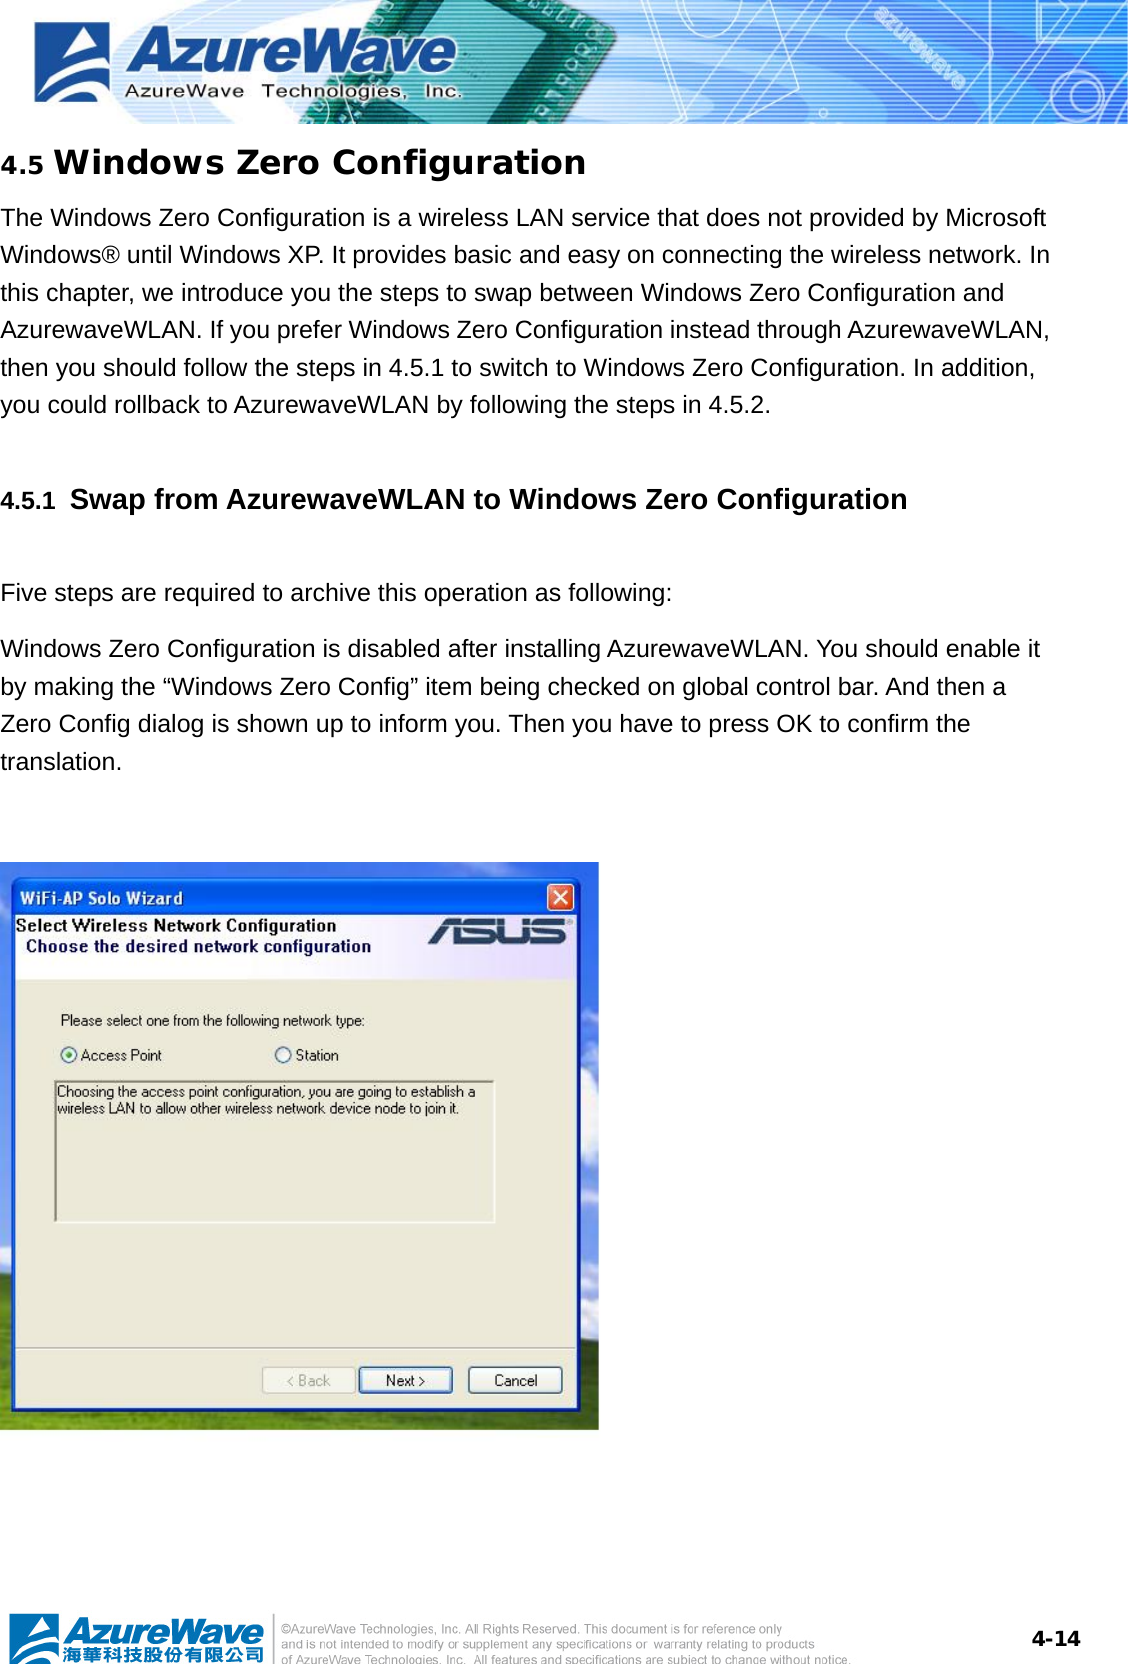  4-144.5 Windows Zero Configuration The Windows Zero Configuration is a wireless LAN service that does not provided by Microsoft Windows® until Windows XP. It provides basic and easy on connecting the wireless network. In this chapter, we introduce you the steps to swap between Windows Zero Configuration and AzurewaveWLAN. If you prefer Windows Zero Configuration instead through AzurewaveWLAN, then you should follow the steps in 4.5.1 to switch to Windows Zero Configuration. In addition, you could rollback to AzurewaveWLAN by following the steps in 4.5.2. 4.5.1  Swap from AzurewaveWLAN to Windows Zero Configuration Five steps are required to archive this operation as following: Windows Zero Configuration is disabled after installing AzurewaveWLAN. You should enable it by making the “Windows Zero Config” item being checked on global control bar. And then a Zero Config dialog is shown up to inform you. Then you have to press OK to confirm the translation.    